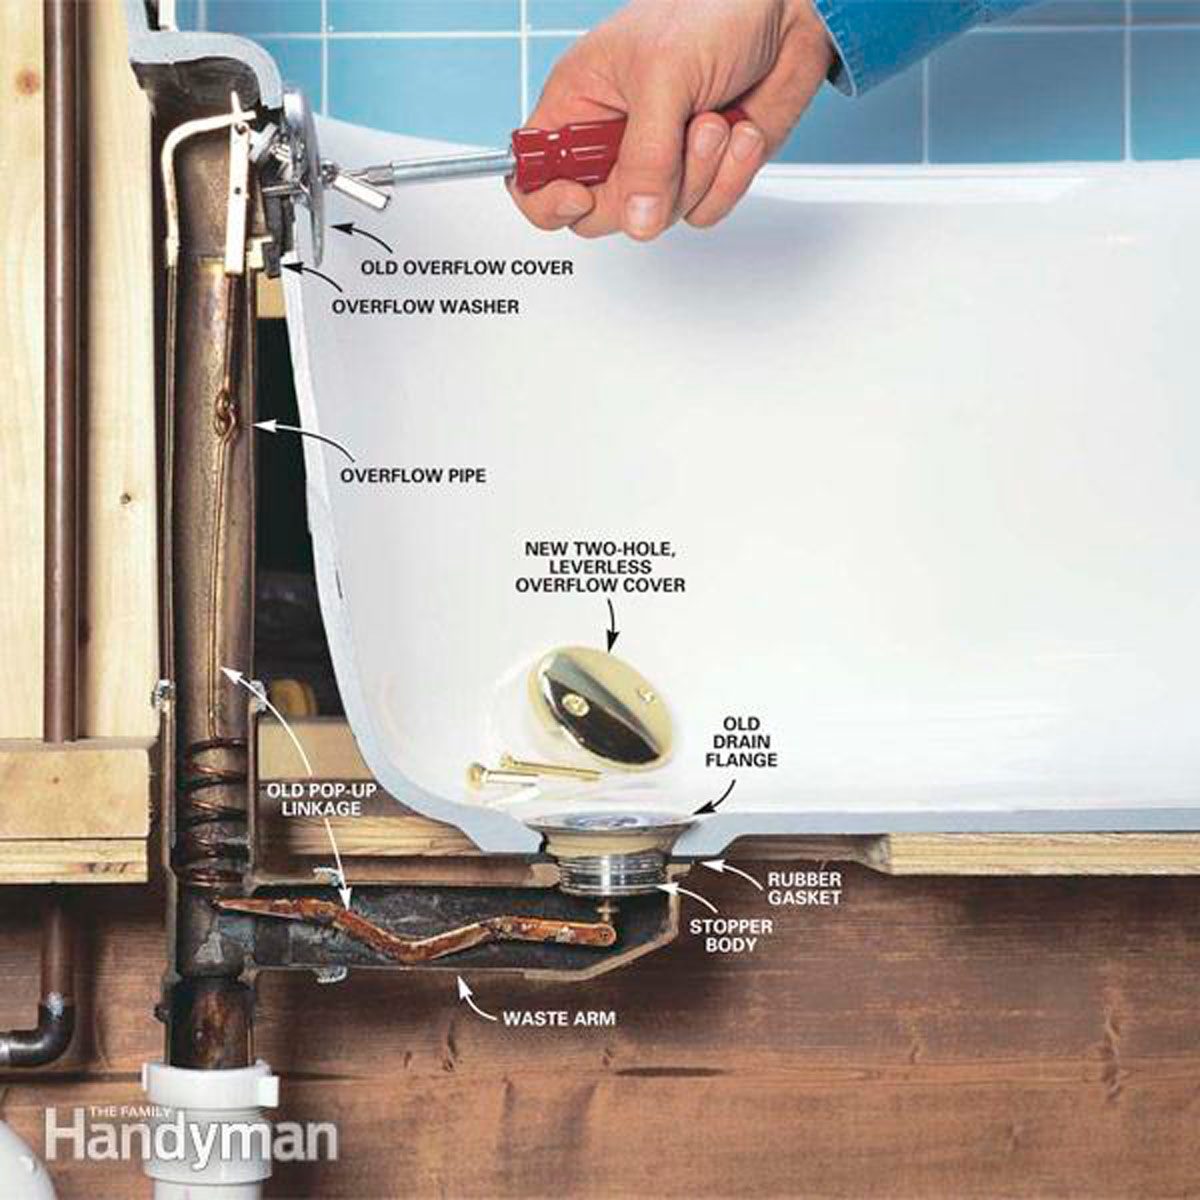 How to Remove a Tub Drain the Easy Way  Diy plumbing, Plumbing, Cleaning  painted walls